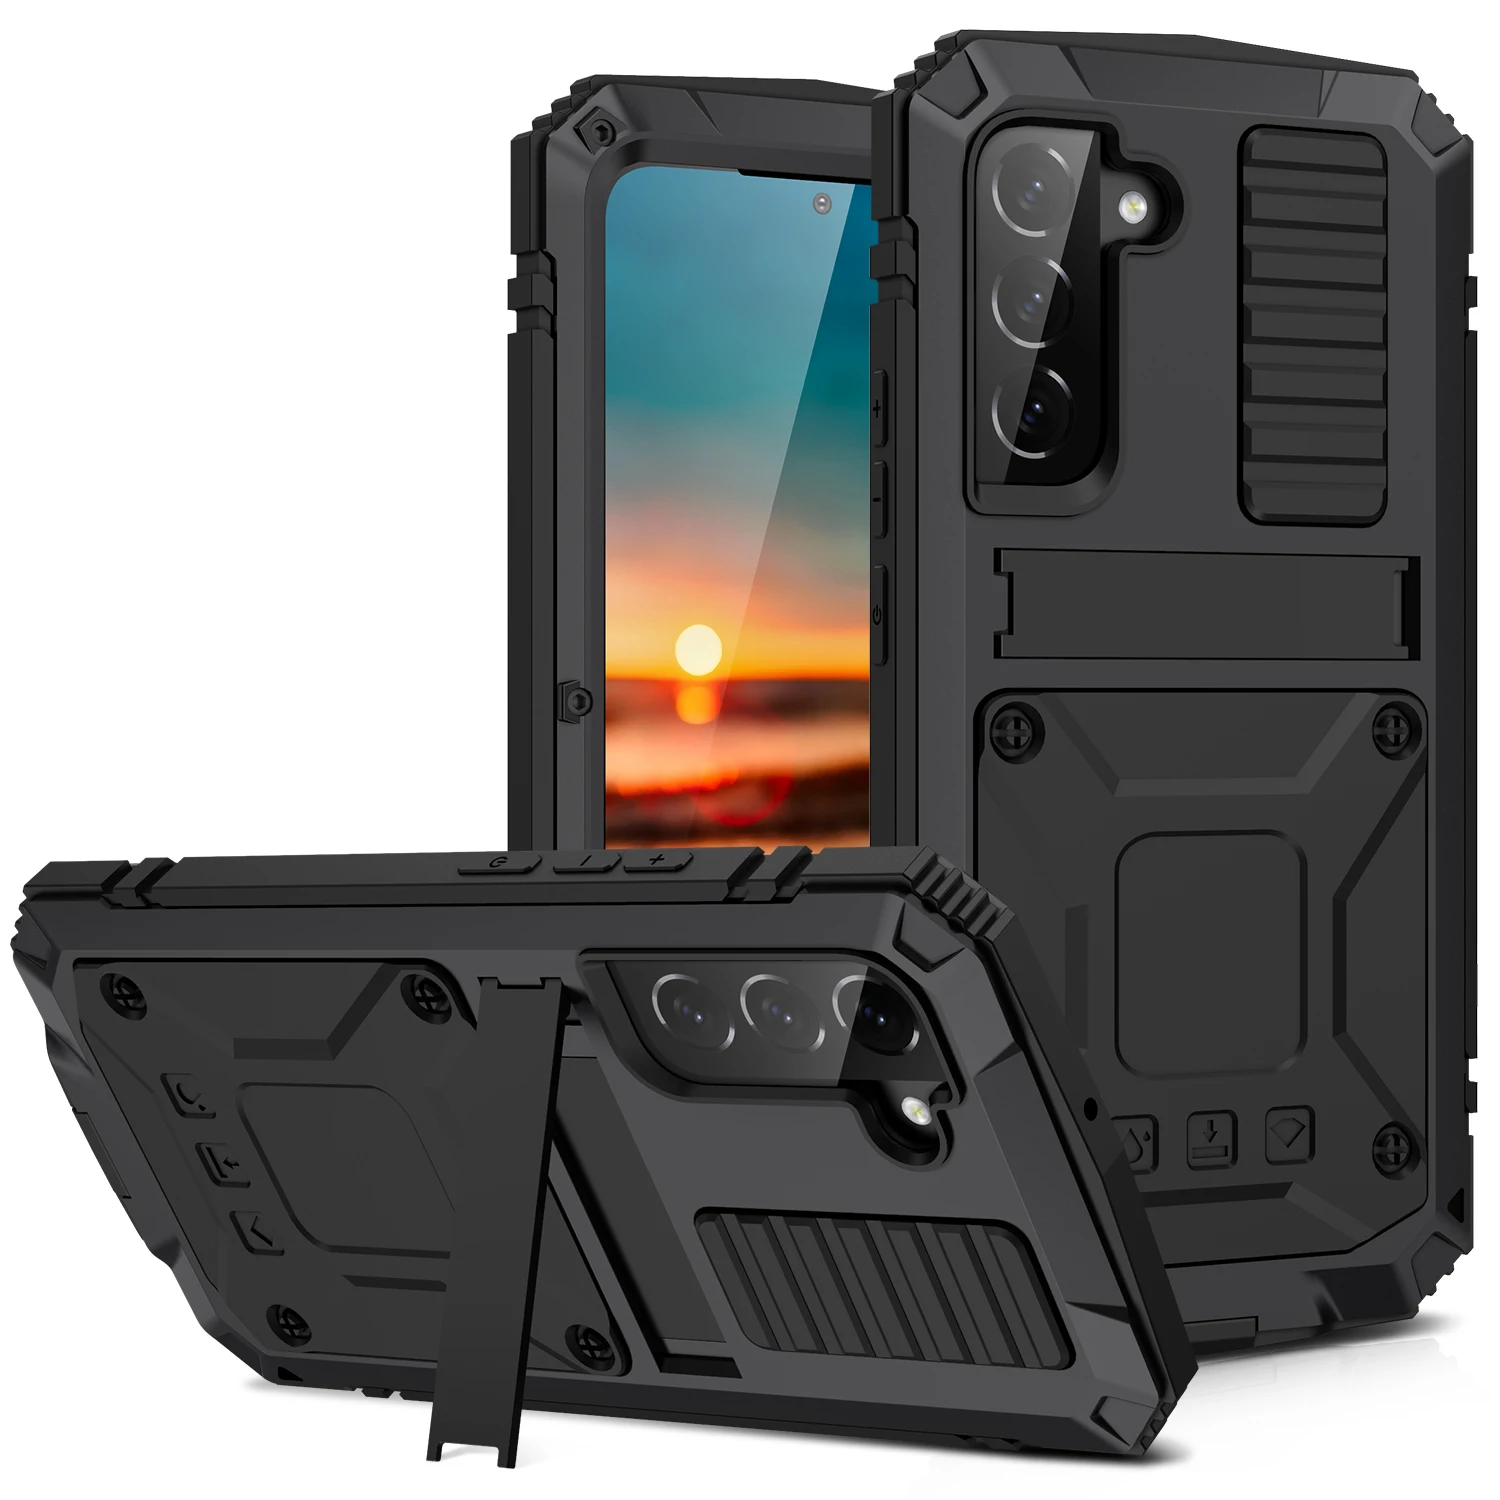 

Waterproof Shockproof Dirtproof Three Proofing Kickstand Case For Samsung Galaxy S22 Plus S22 Ultra Case Cover Phone Shell Bag